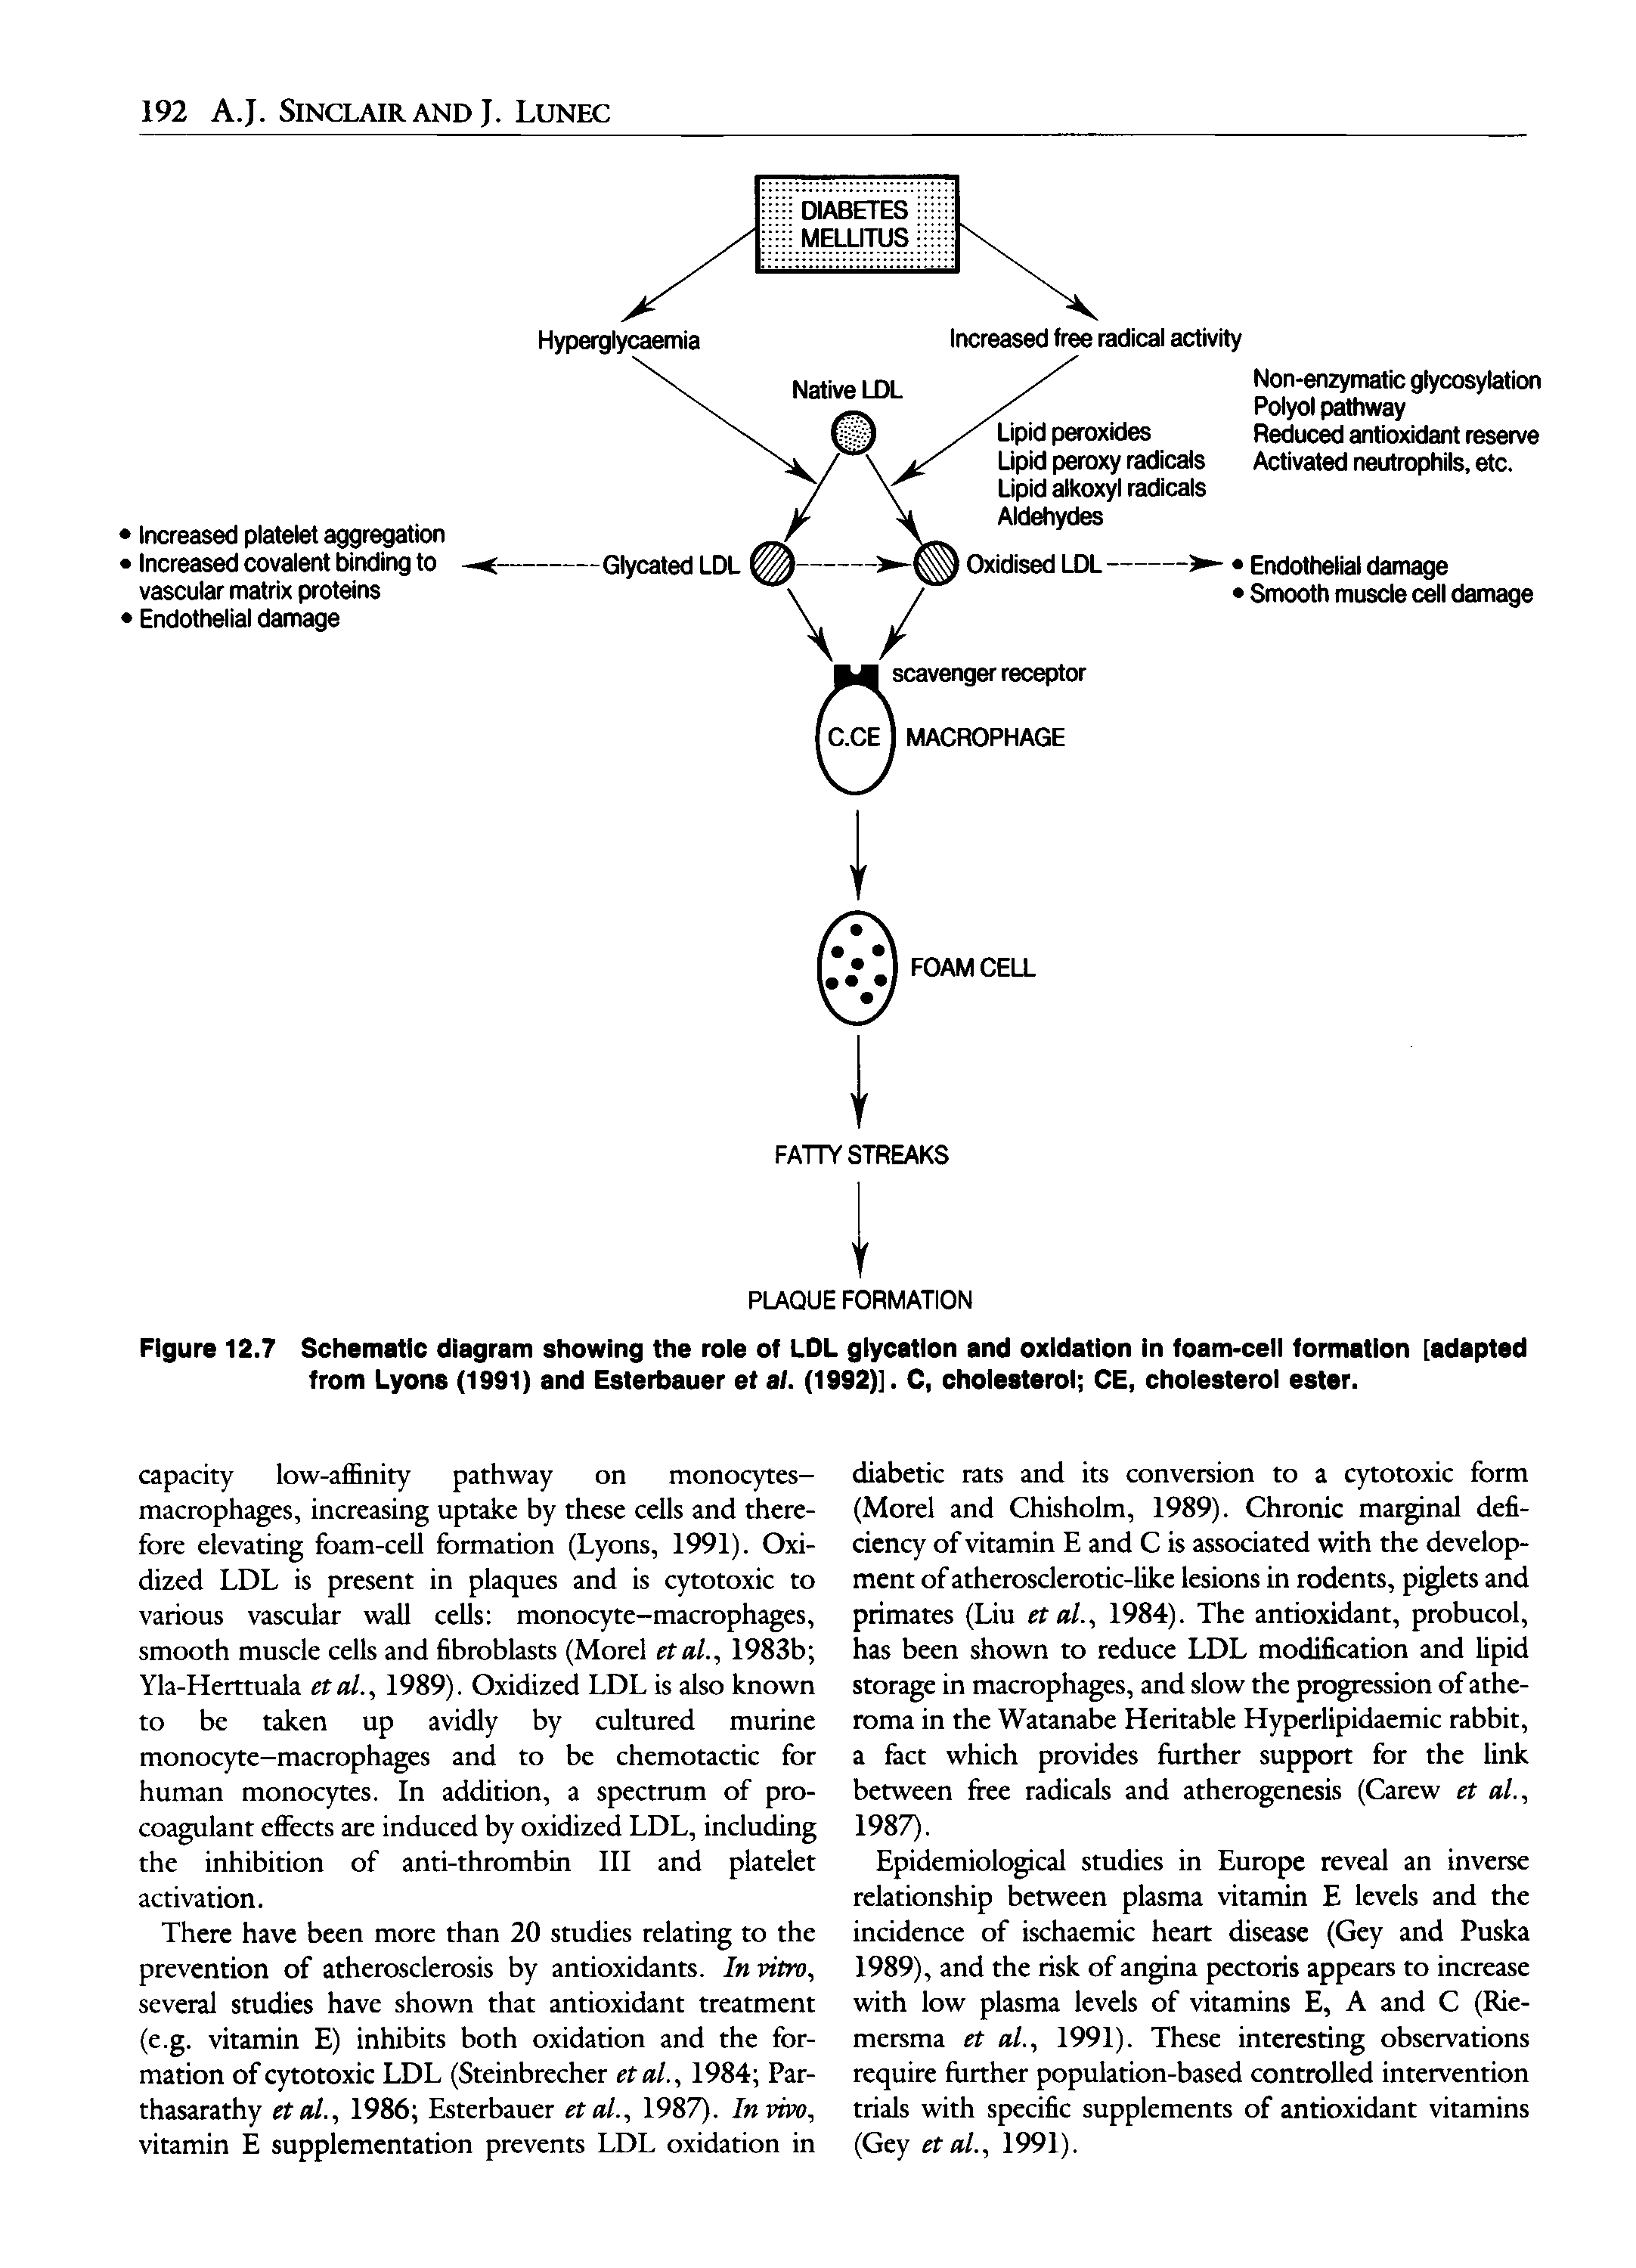 Figure 12.7 Schematic diagram showing the role of LDL glycatlon and oxidation in foam-cell formation [adapted from Lyons (1991) and Esterbauer et al. (1992)]. C, cholesterol CE, cholesterol ester.